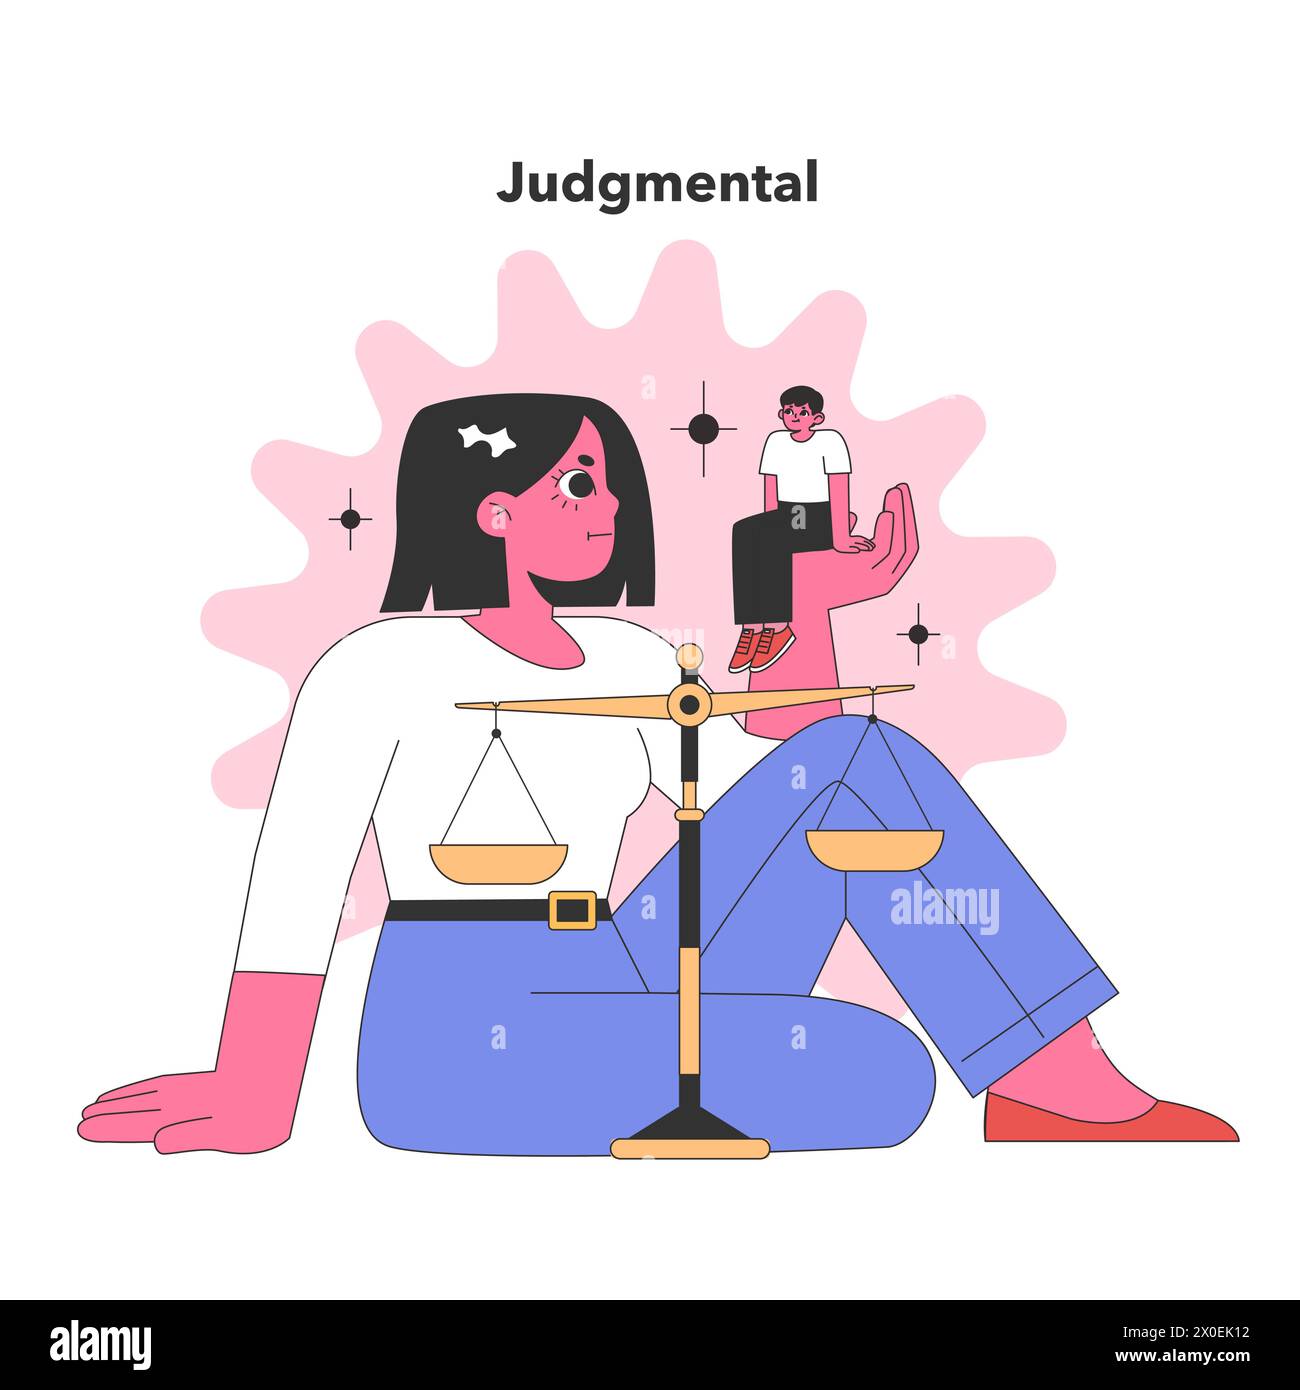 Judgmental Personality trait. A contemplative figure with scales, symbolizing the weighing of opinions and critical judgment. Flat vector illustration. Stock Vector